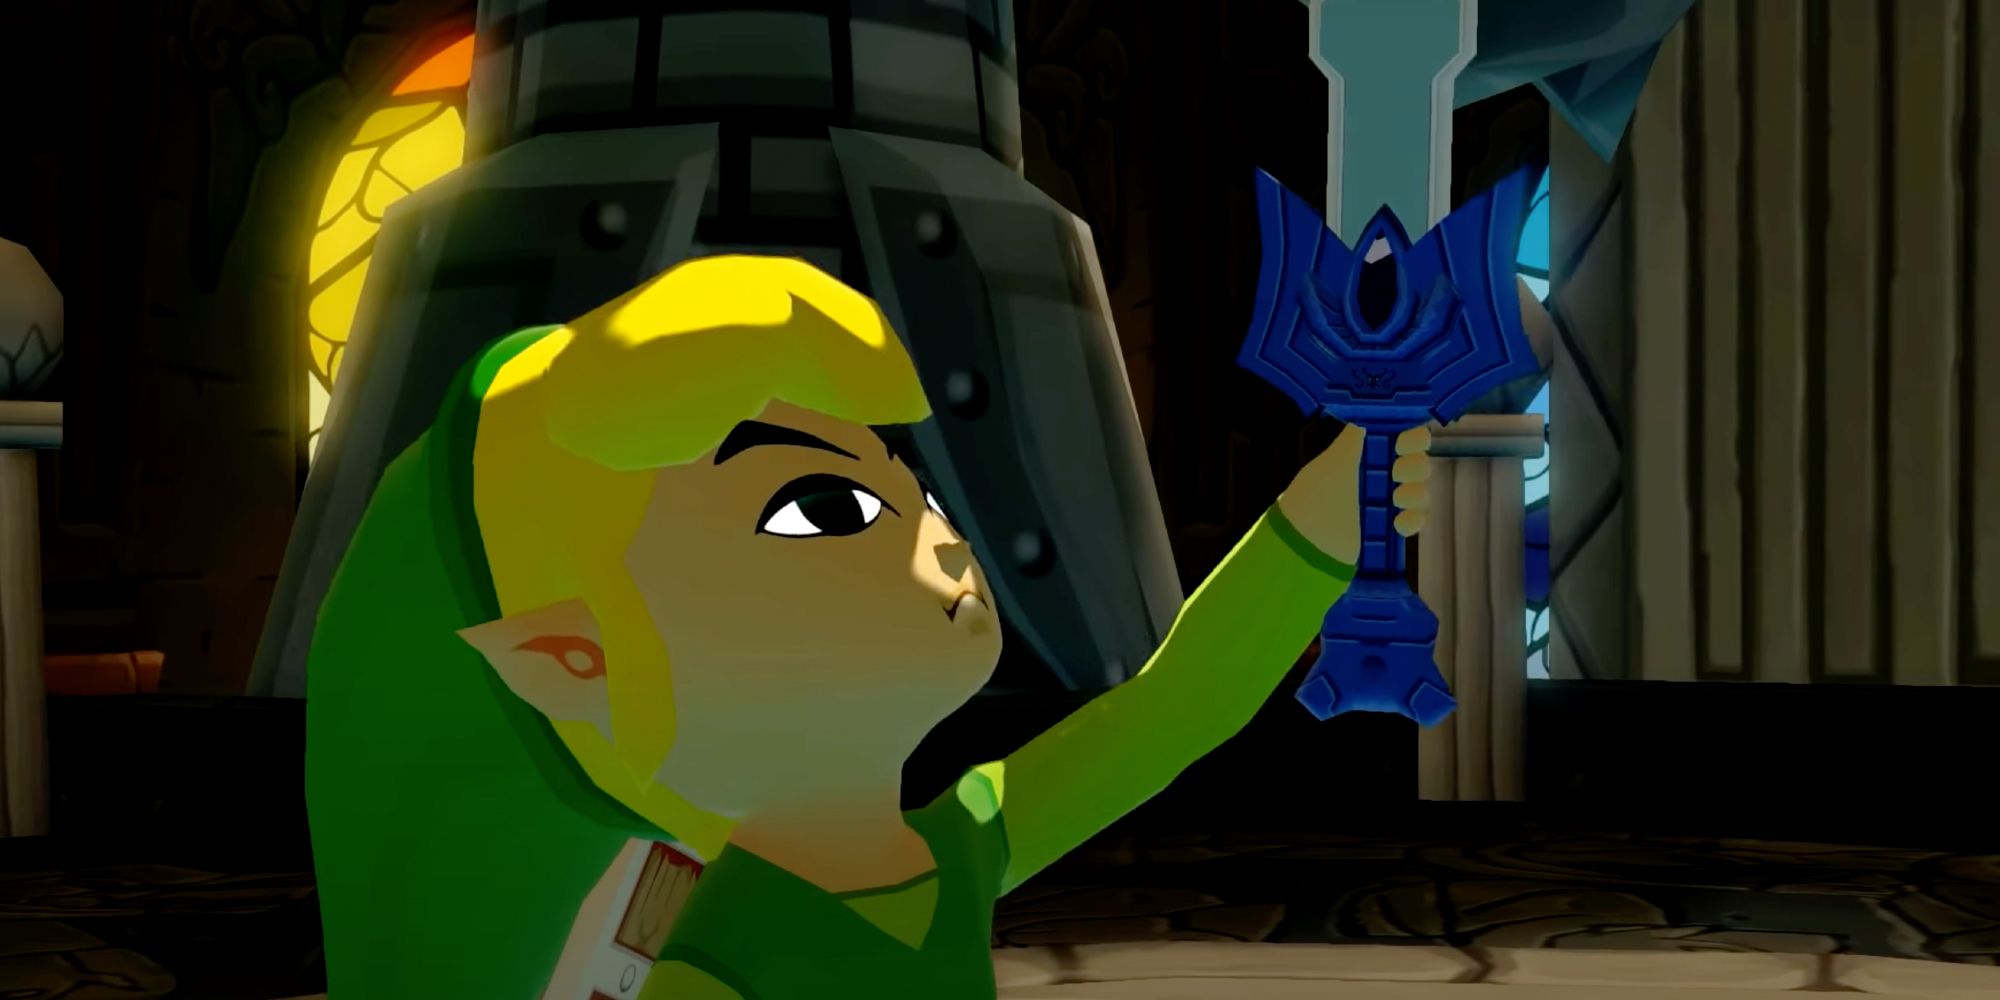 9 Unpopular Opinions About The Legend Of Zelda Games According To Reddit